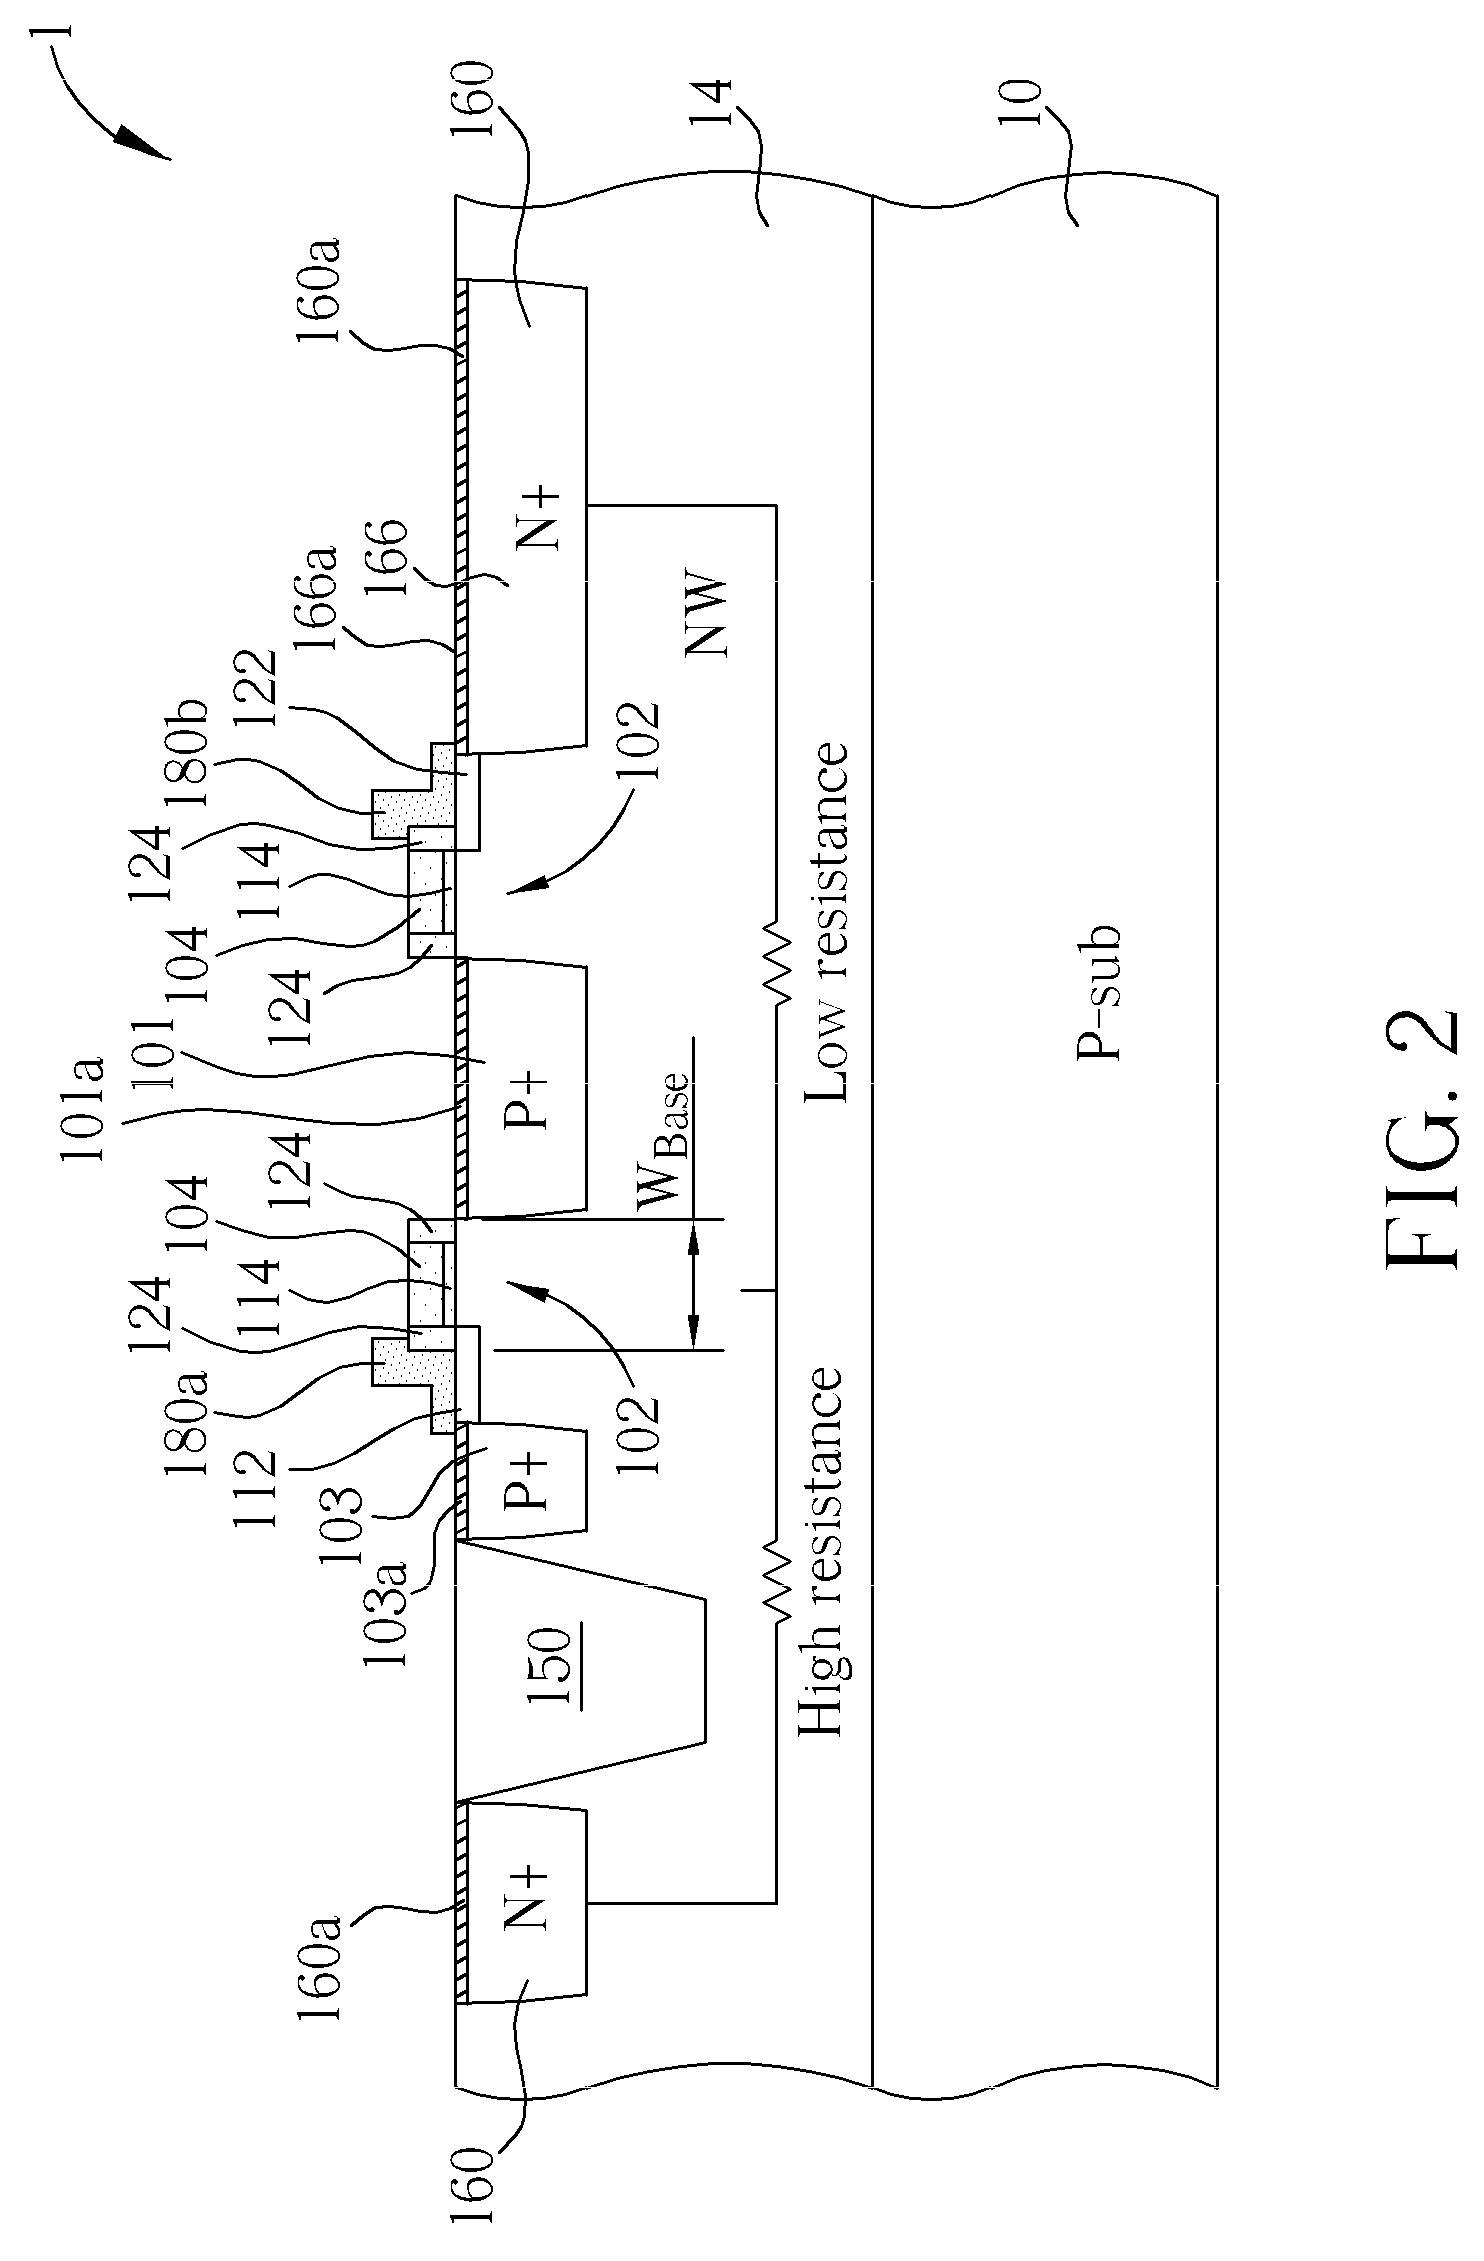 Lateral bipolar junction transistor with reduced base resistance